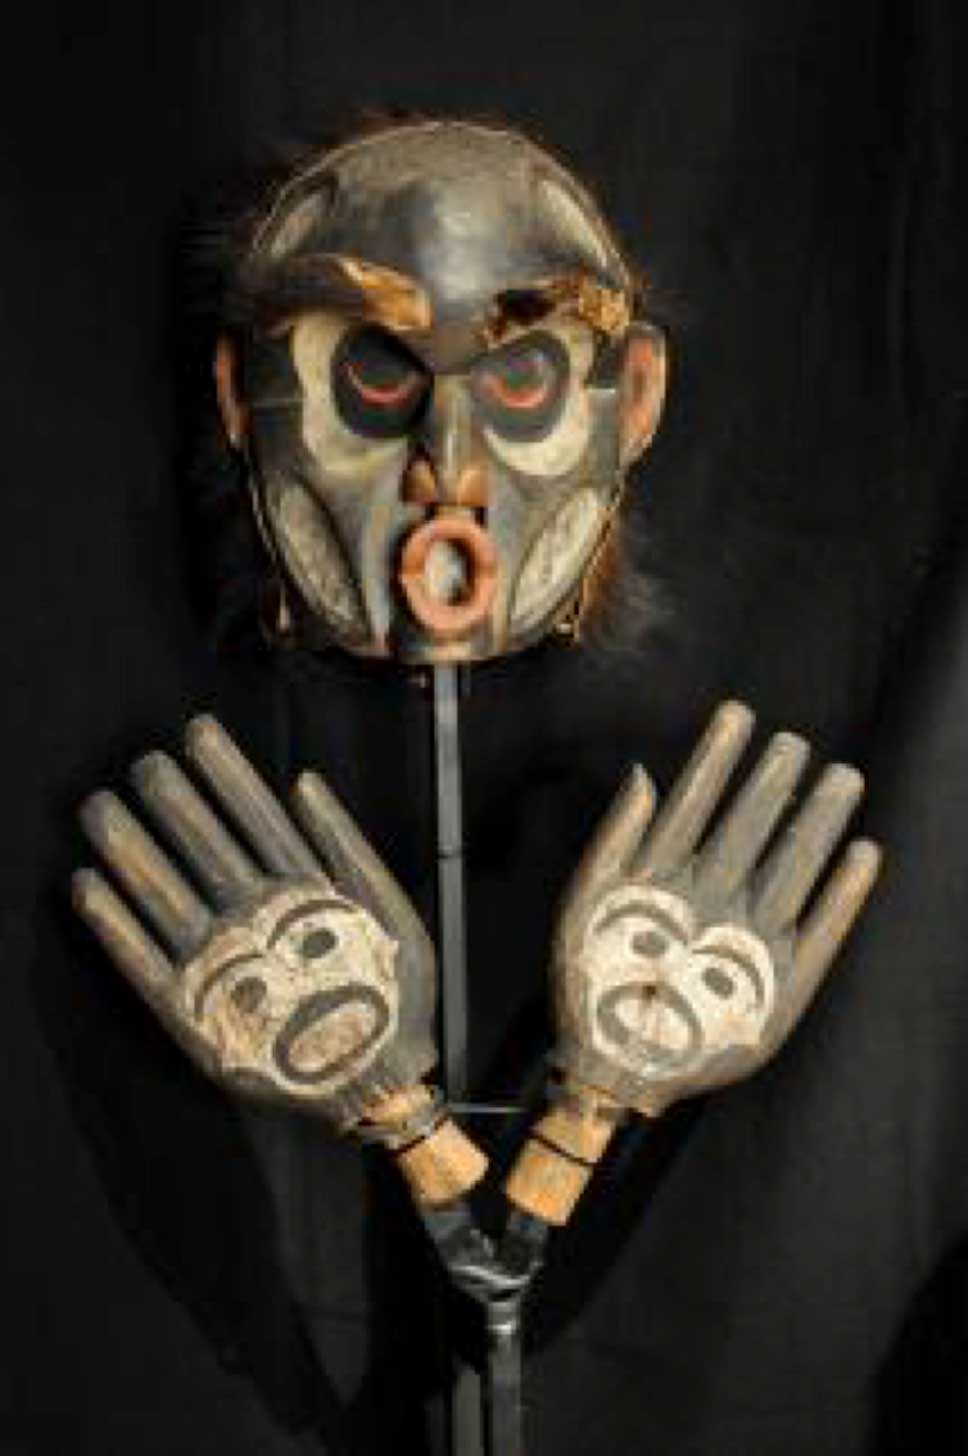 Colour photograph of Dzunukwa - Giant of The Woods mask shot against a black background